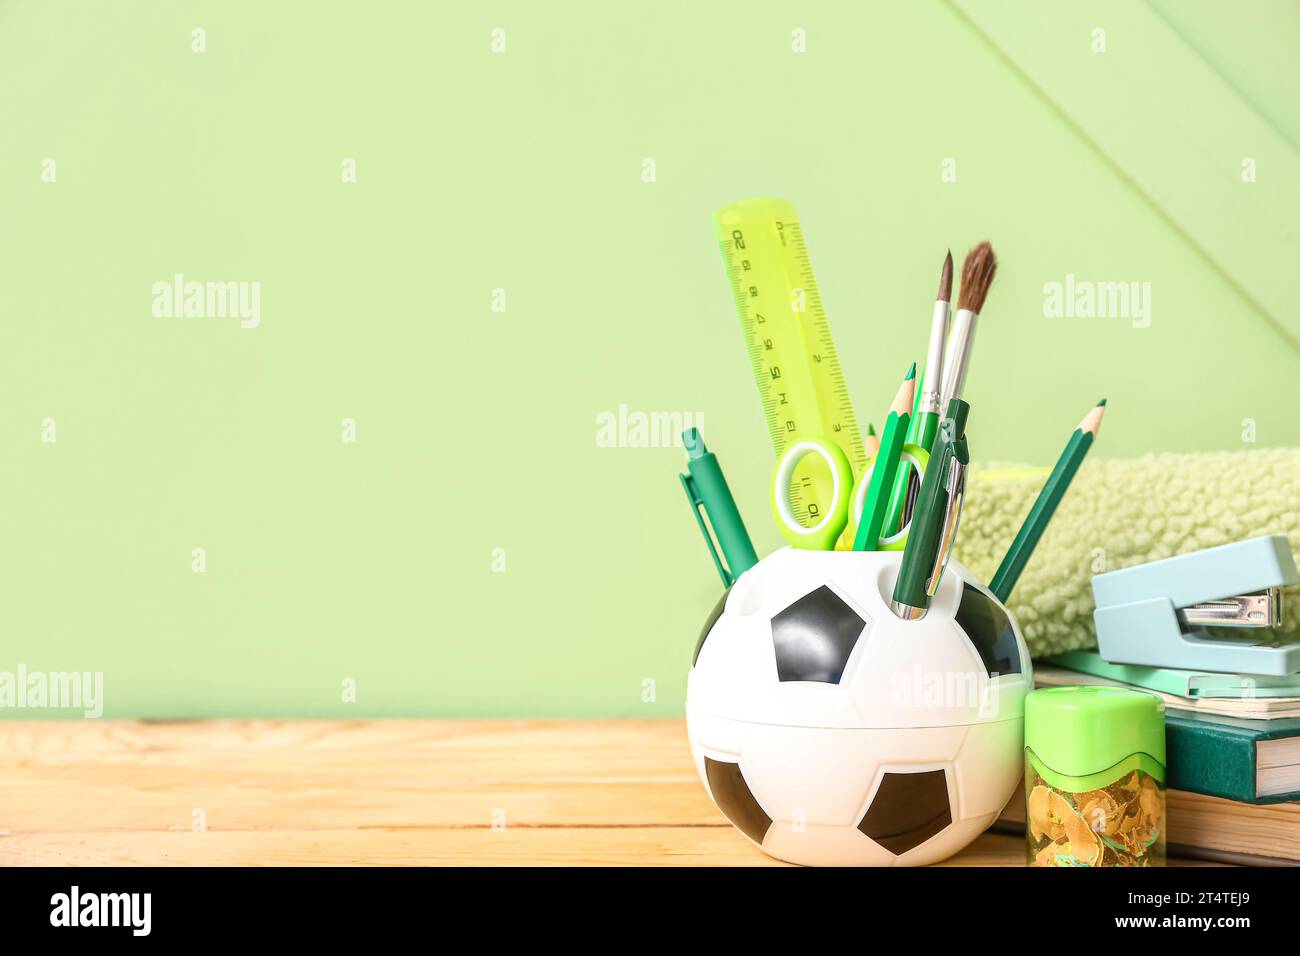 Holder in shape of soccer ball with different stationery on wooden desk, closeup Stock Photo